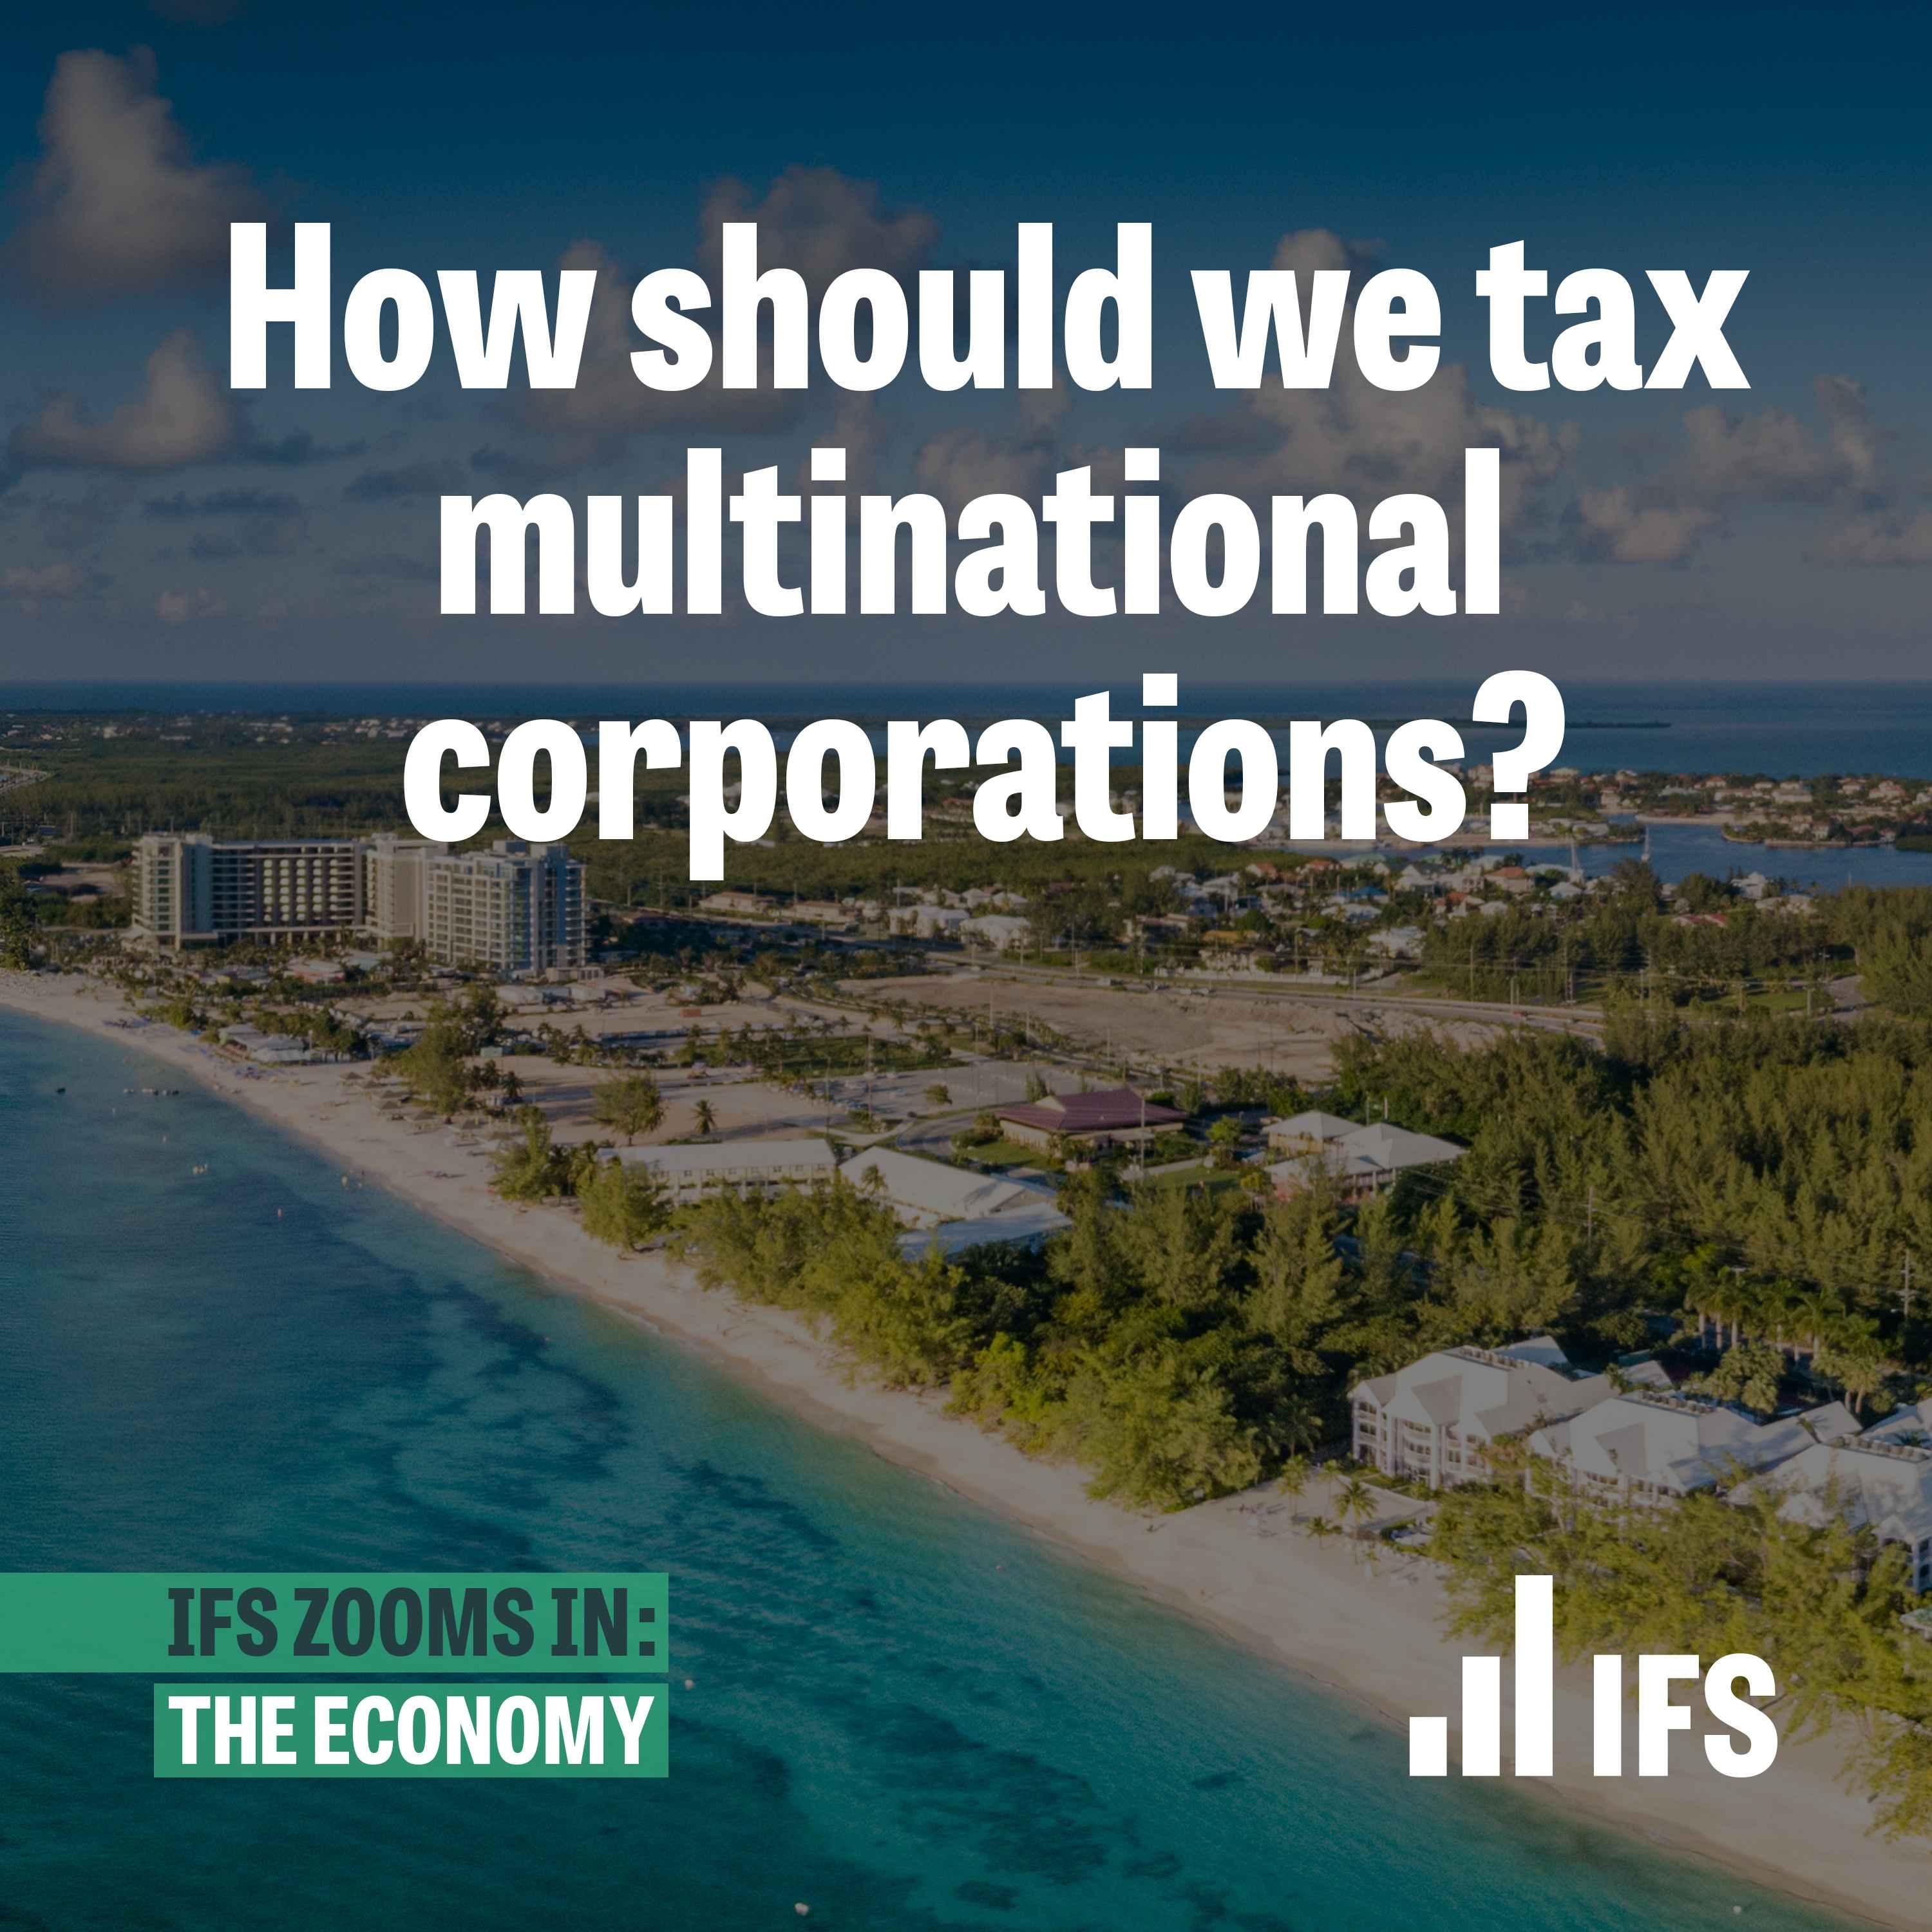 How should we tax multinational corporations?